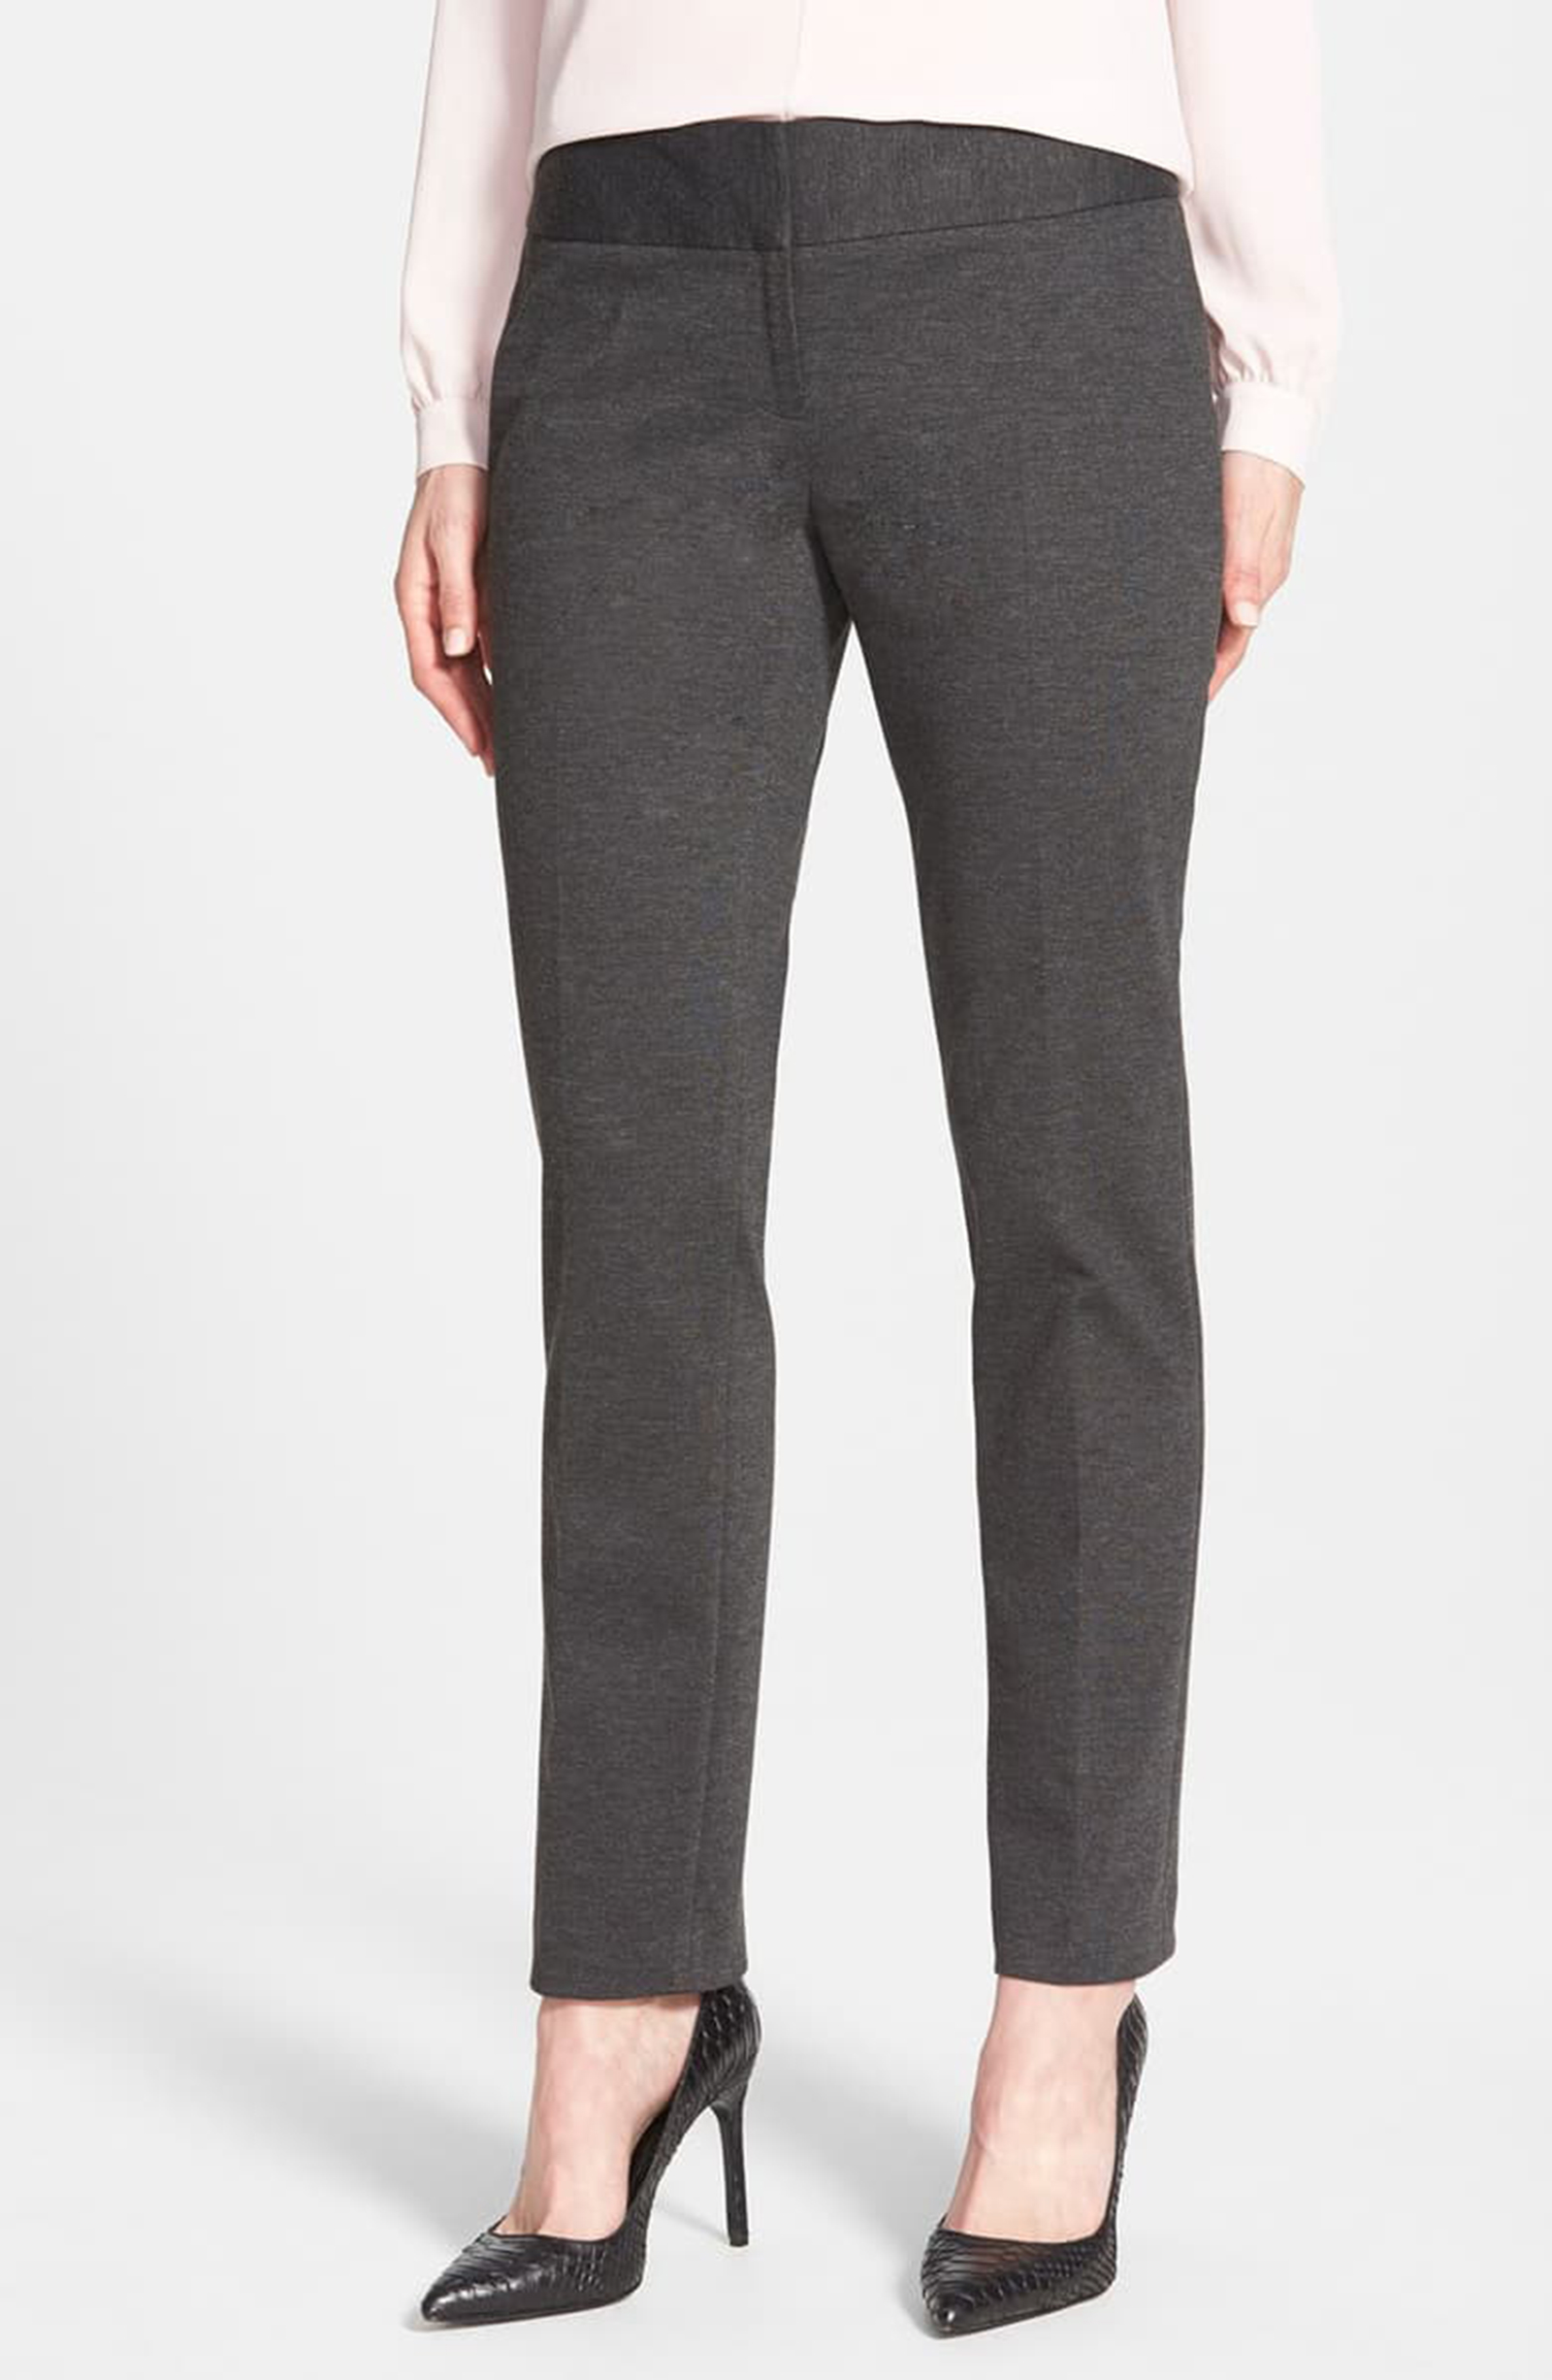 Jude Connally Lucia Ponte Knit Elastic Waistband Straight Pull-On Ankle  Pants | Dillard's